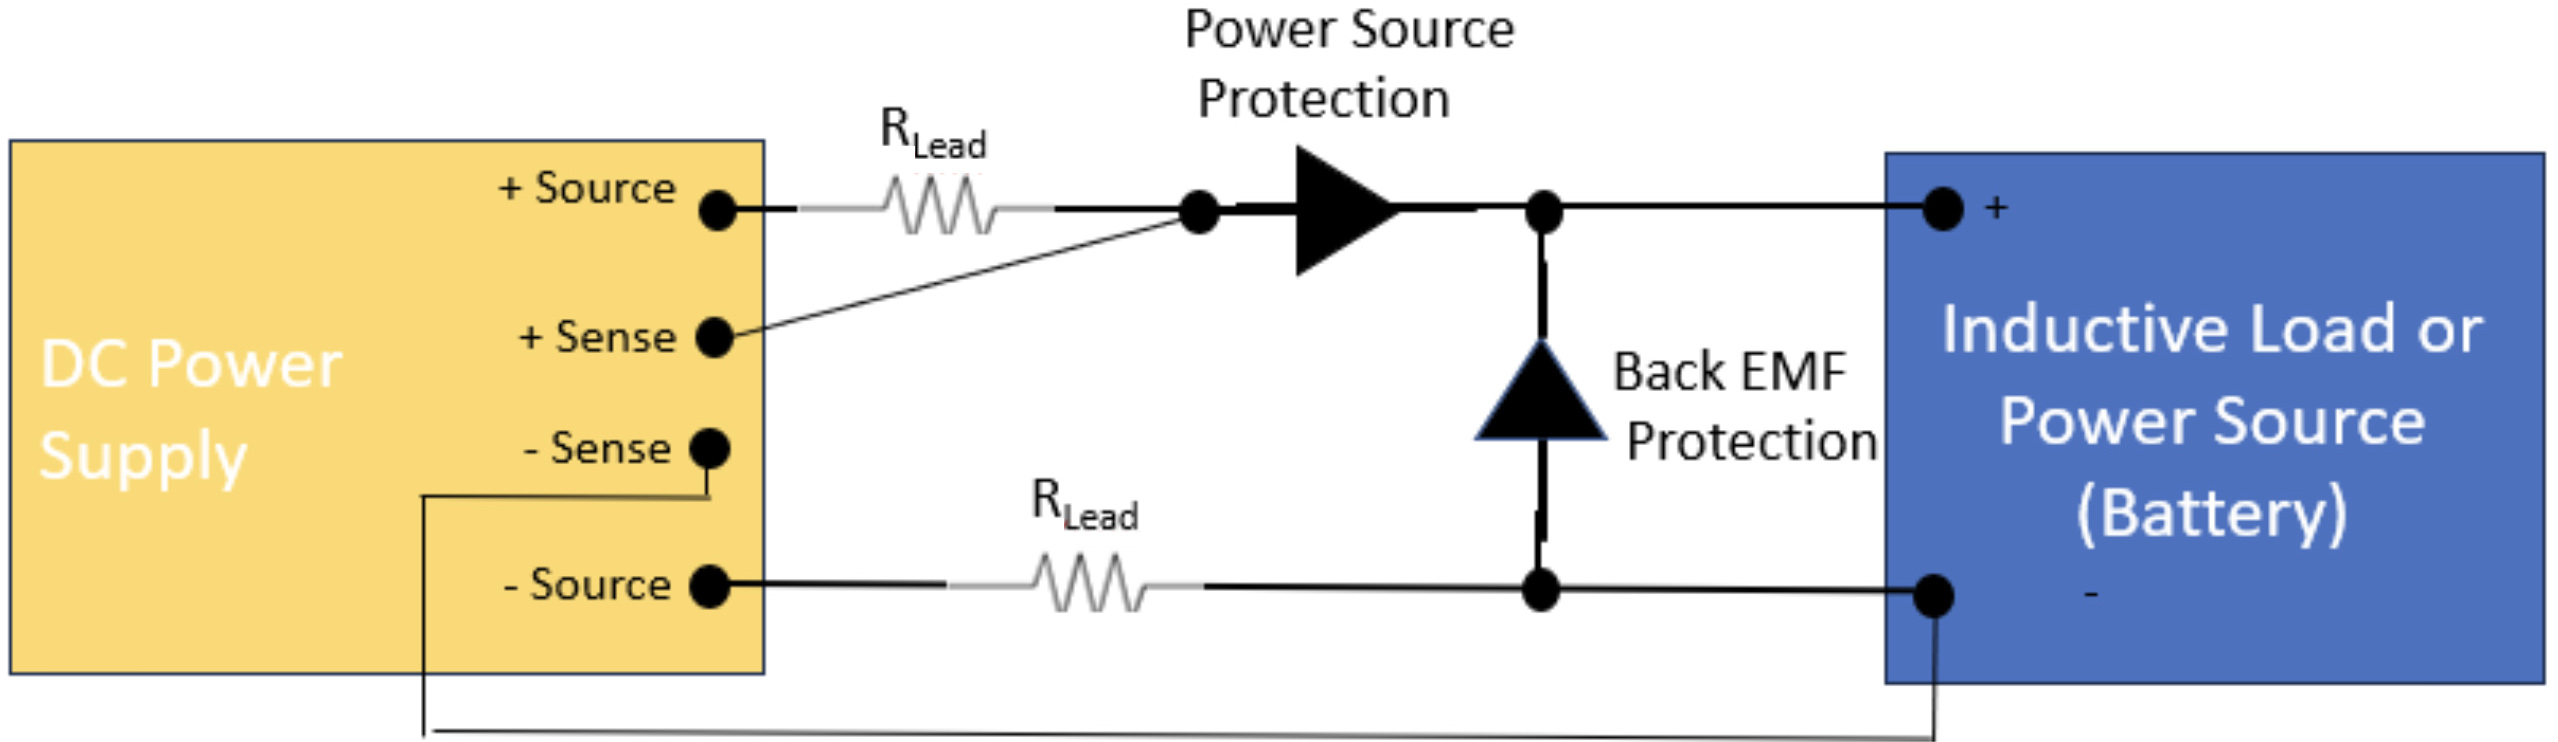 Remote sensing schematic for inductive loads